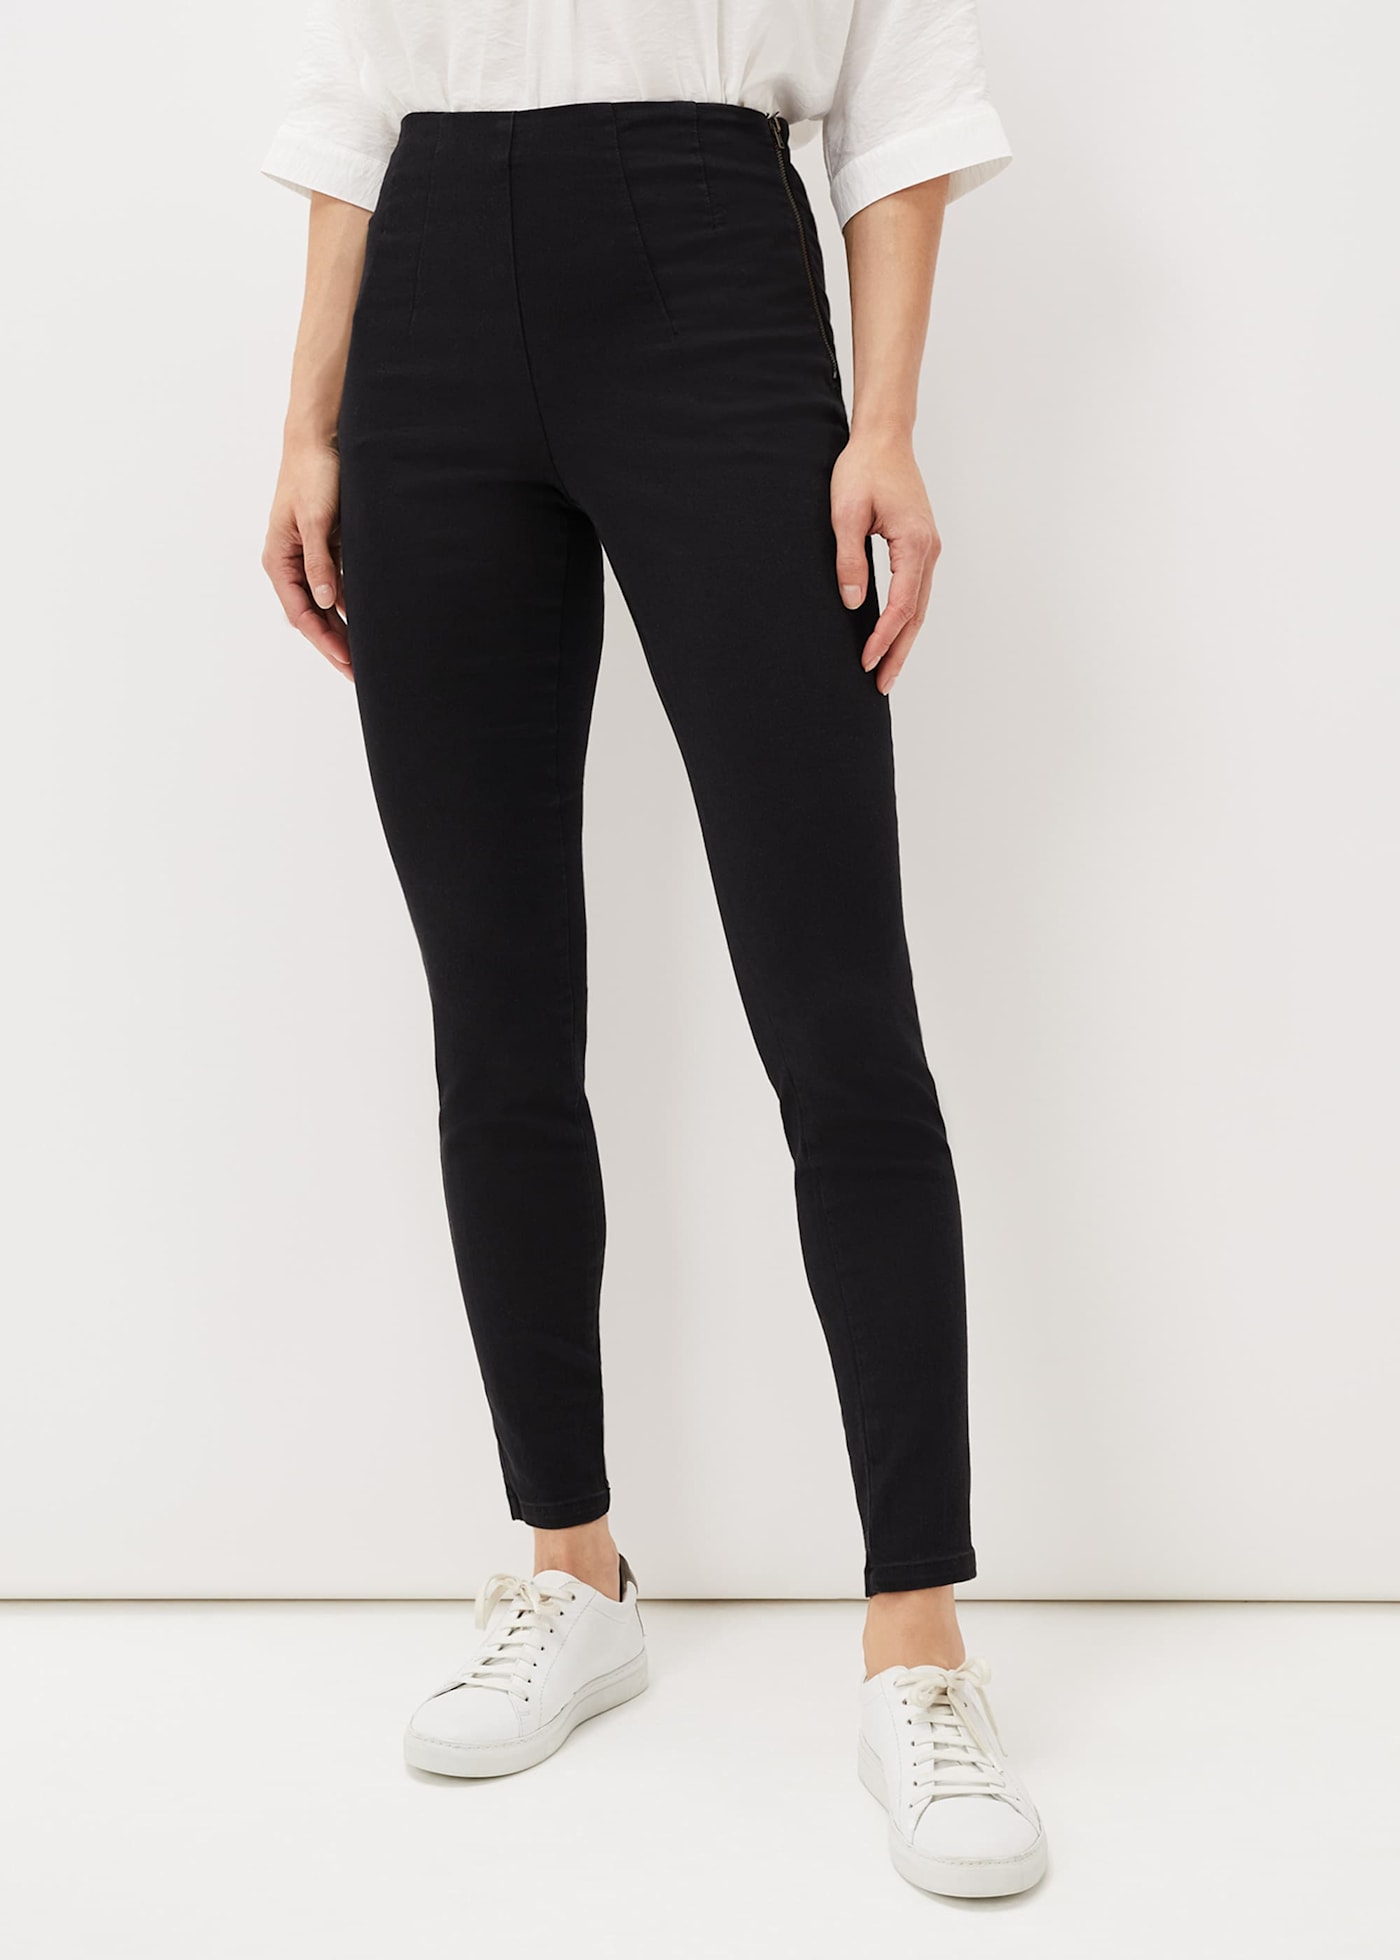 Best trousers leggings: Comfy trousers for women to shop in 2023